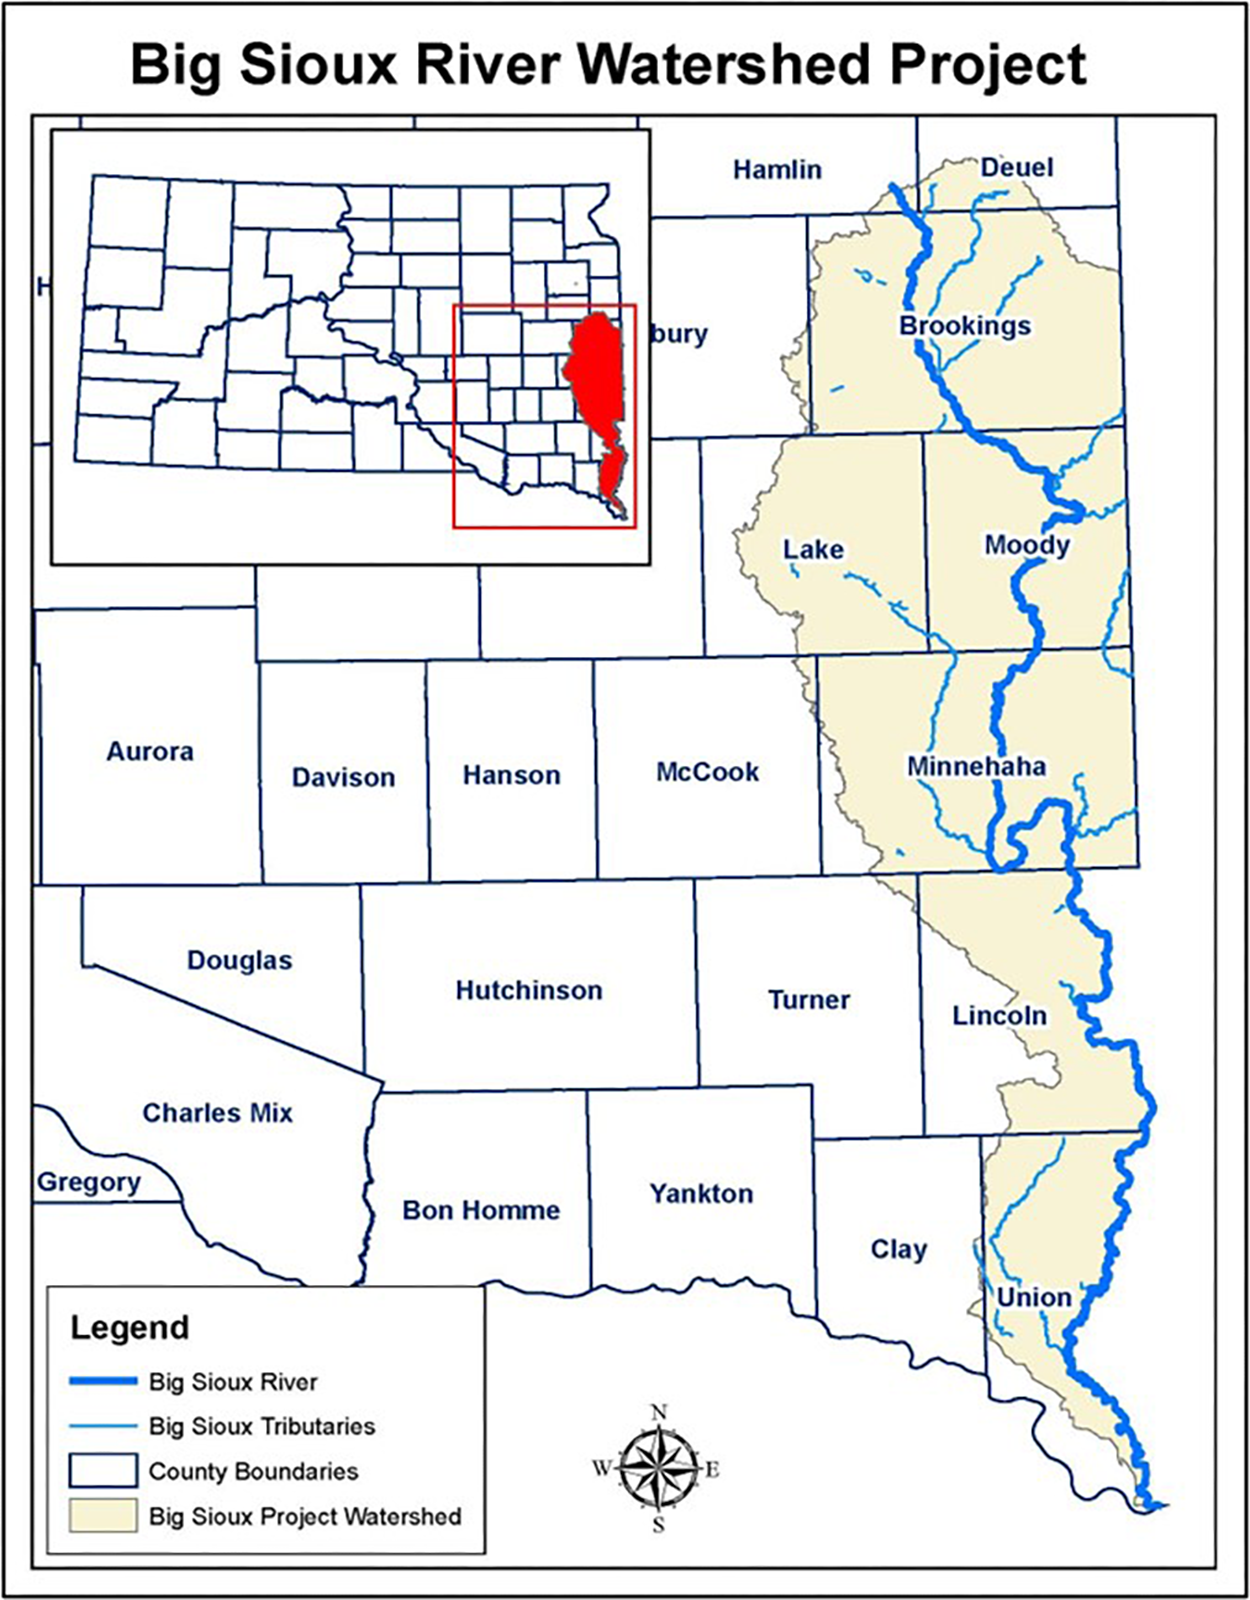 Map of the Big Sioux River Watershed Project boundary.